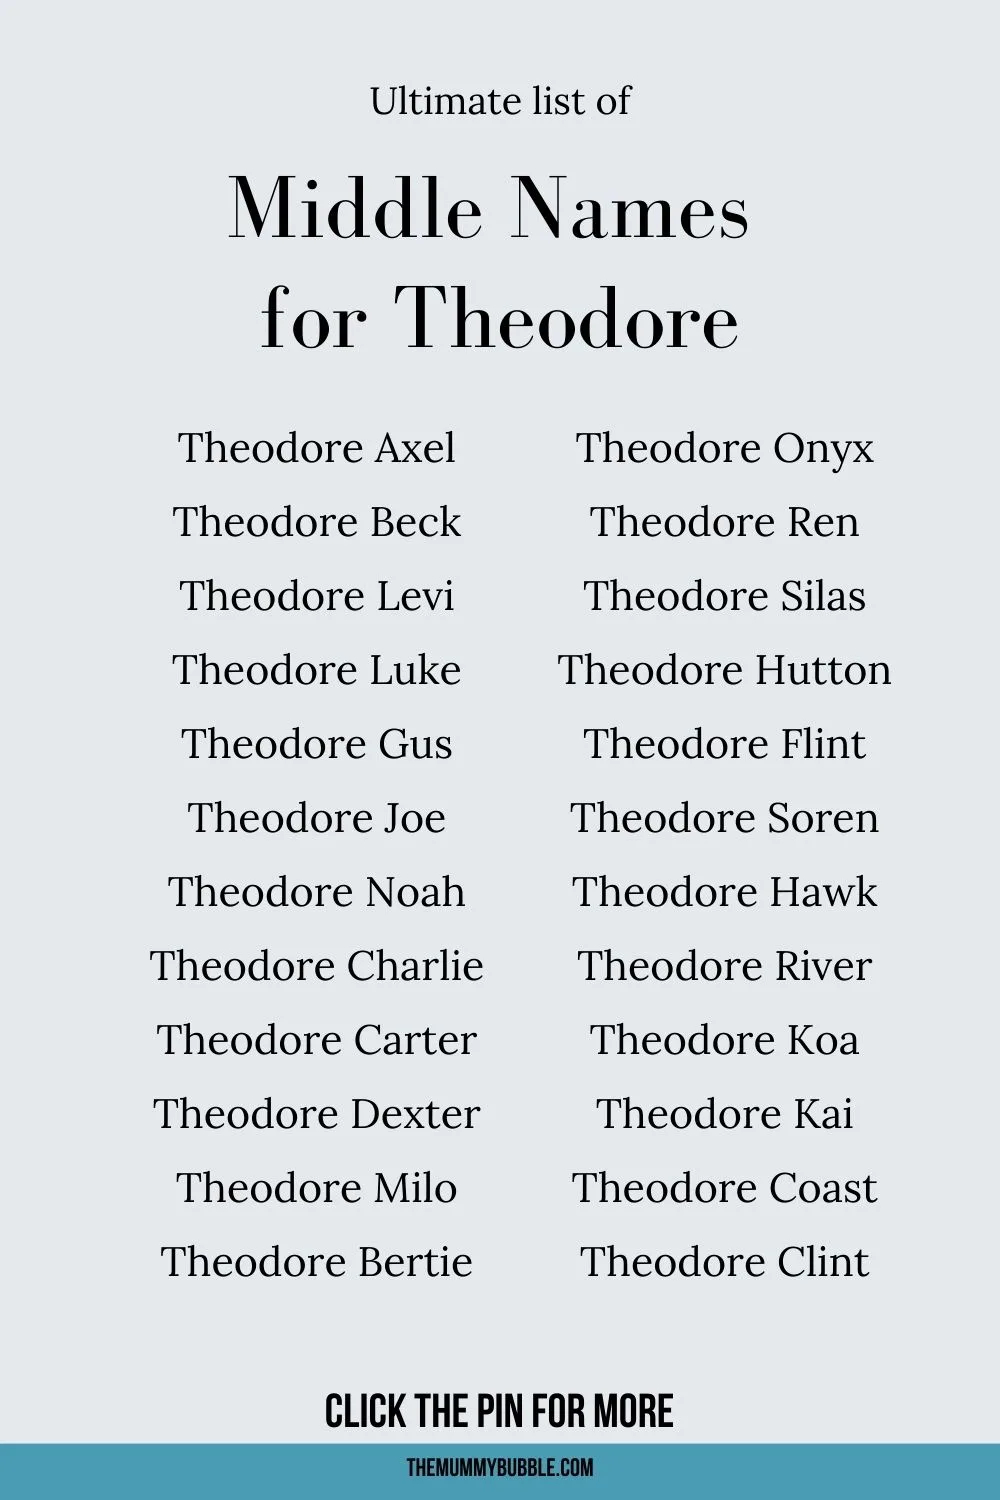 Middle names for Theodore 